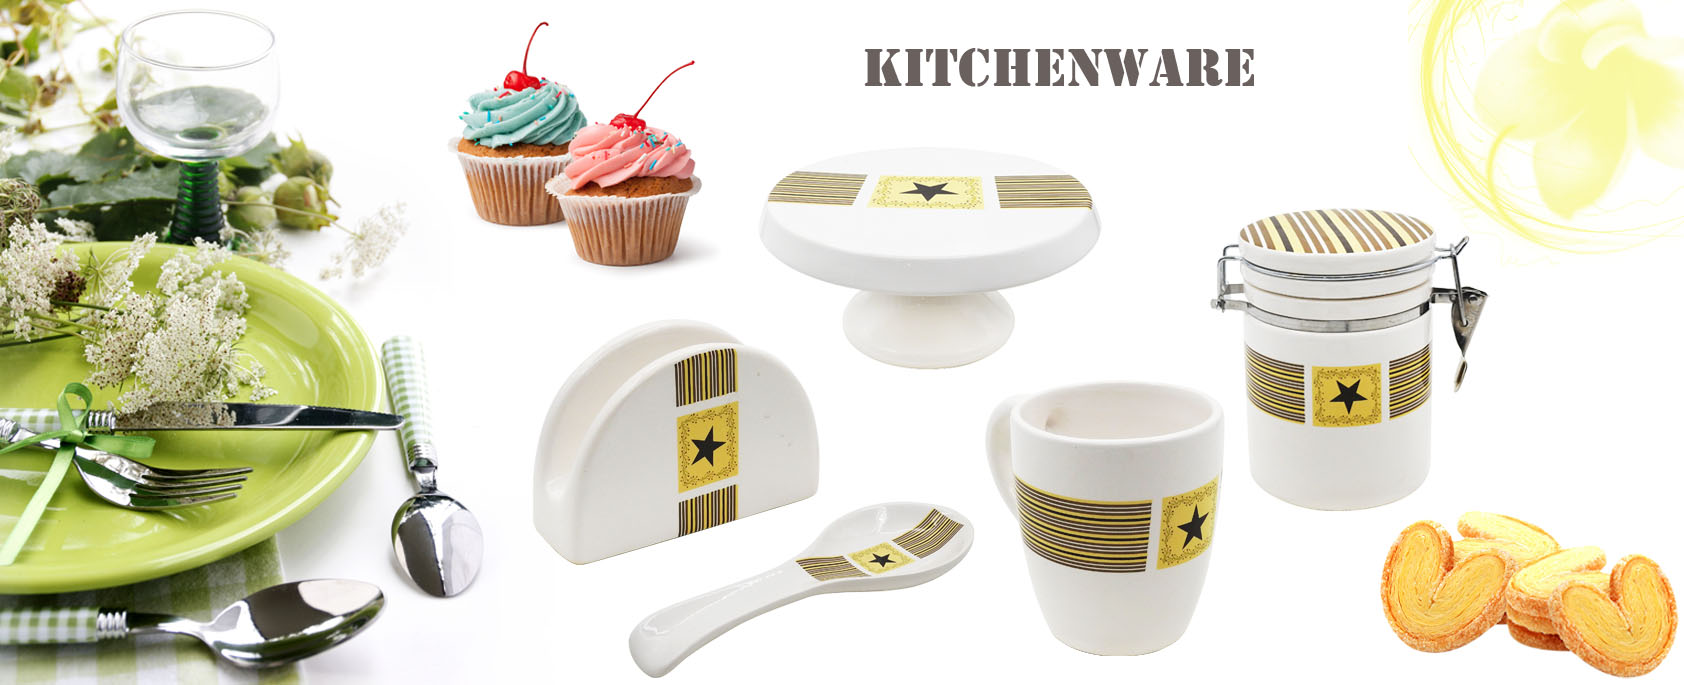 Kitchenwares from Value Deco